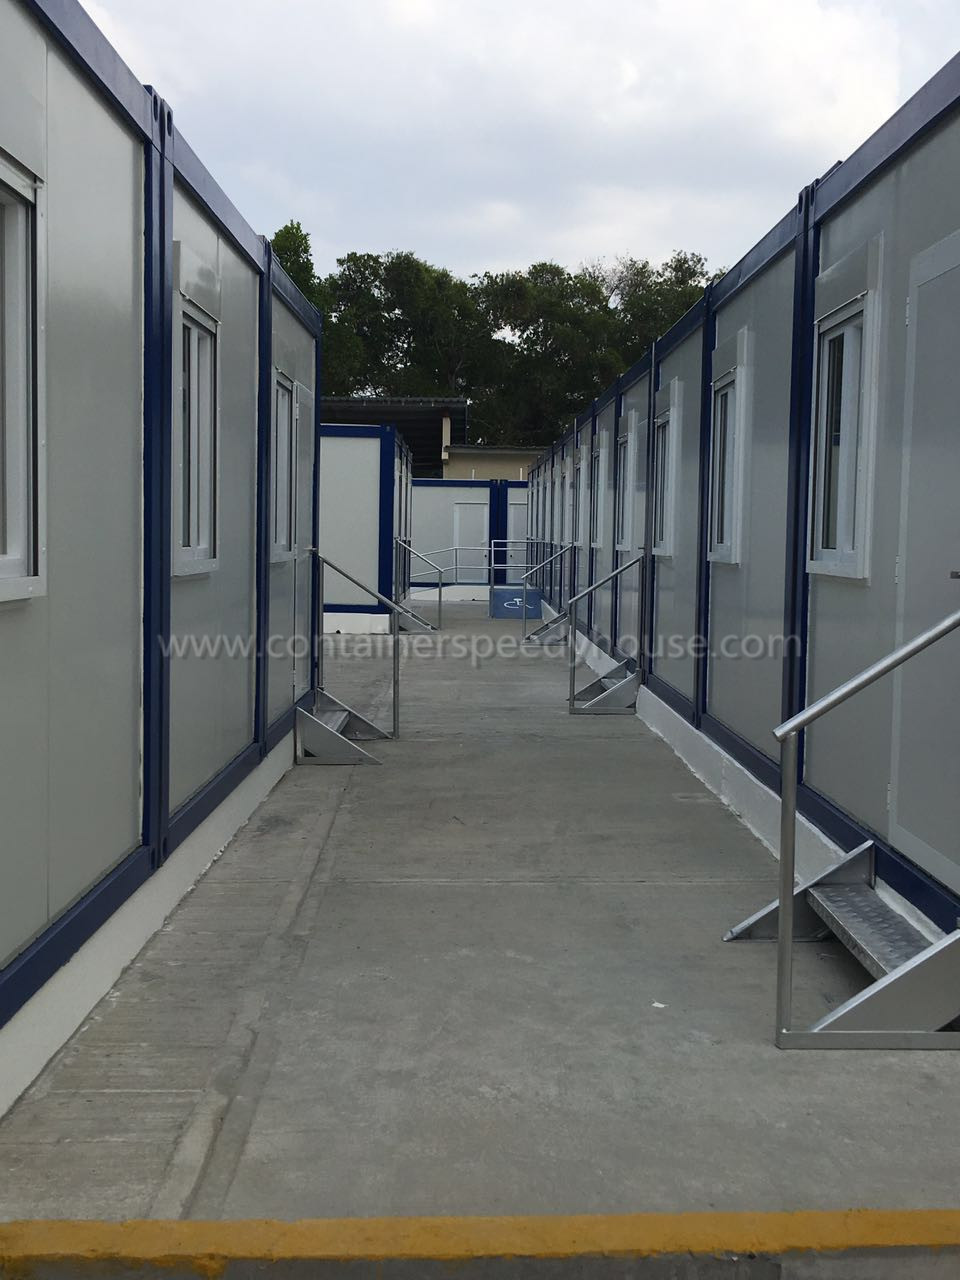 Container classroom 3